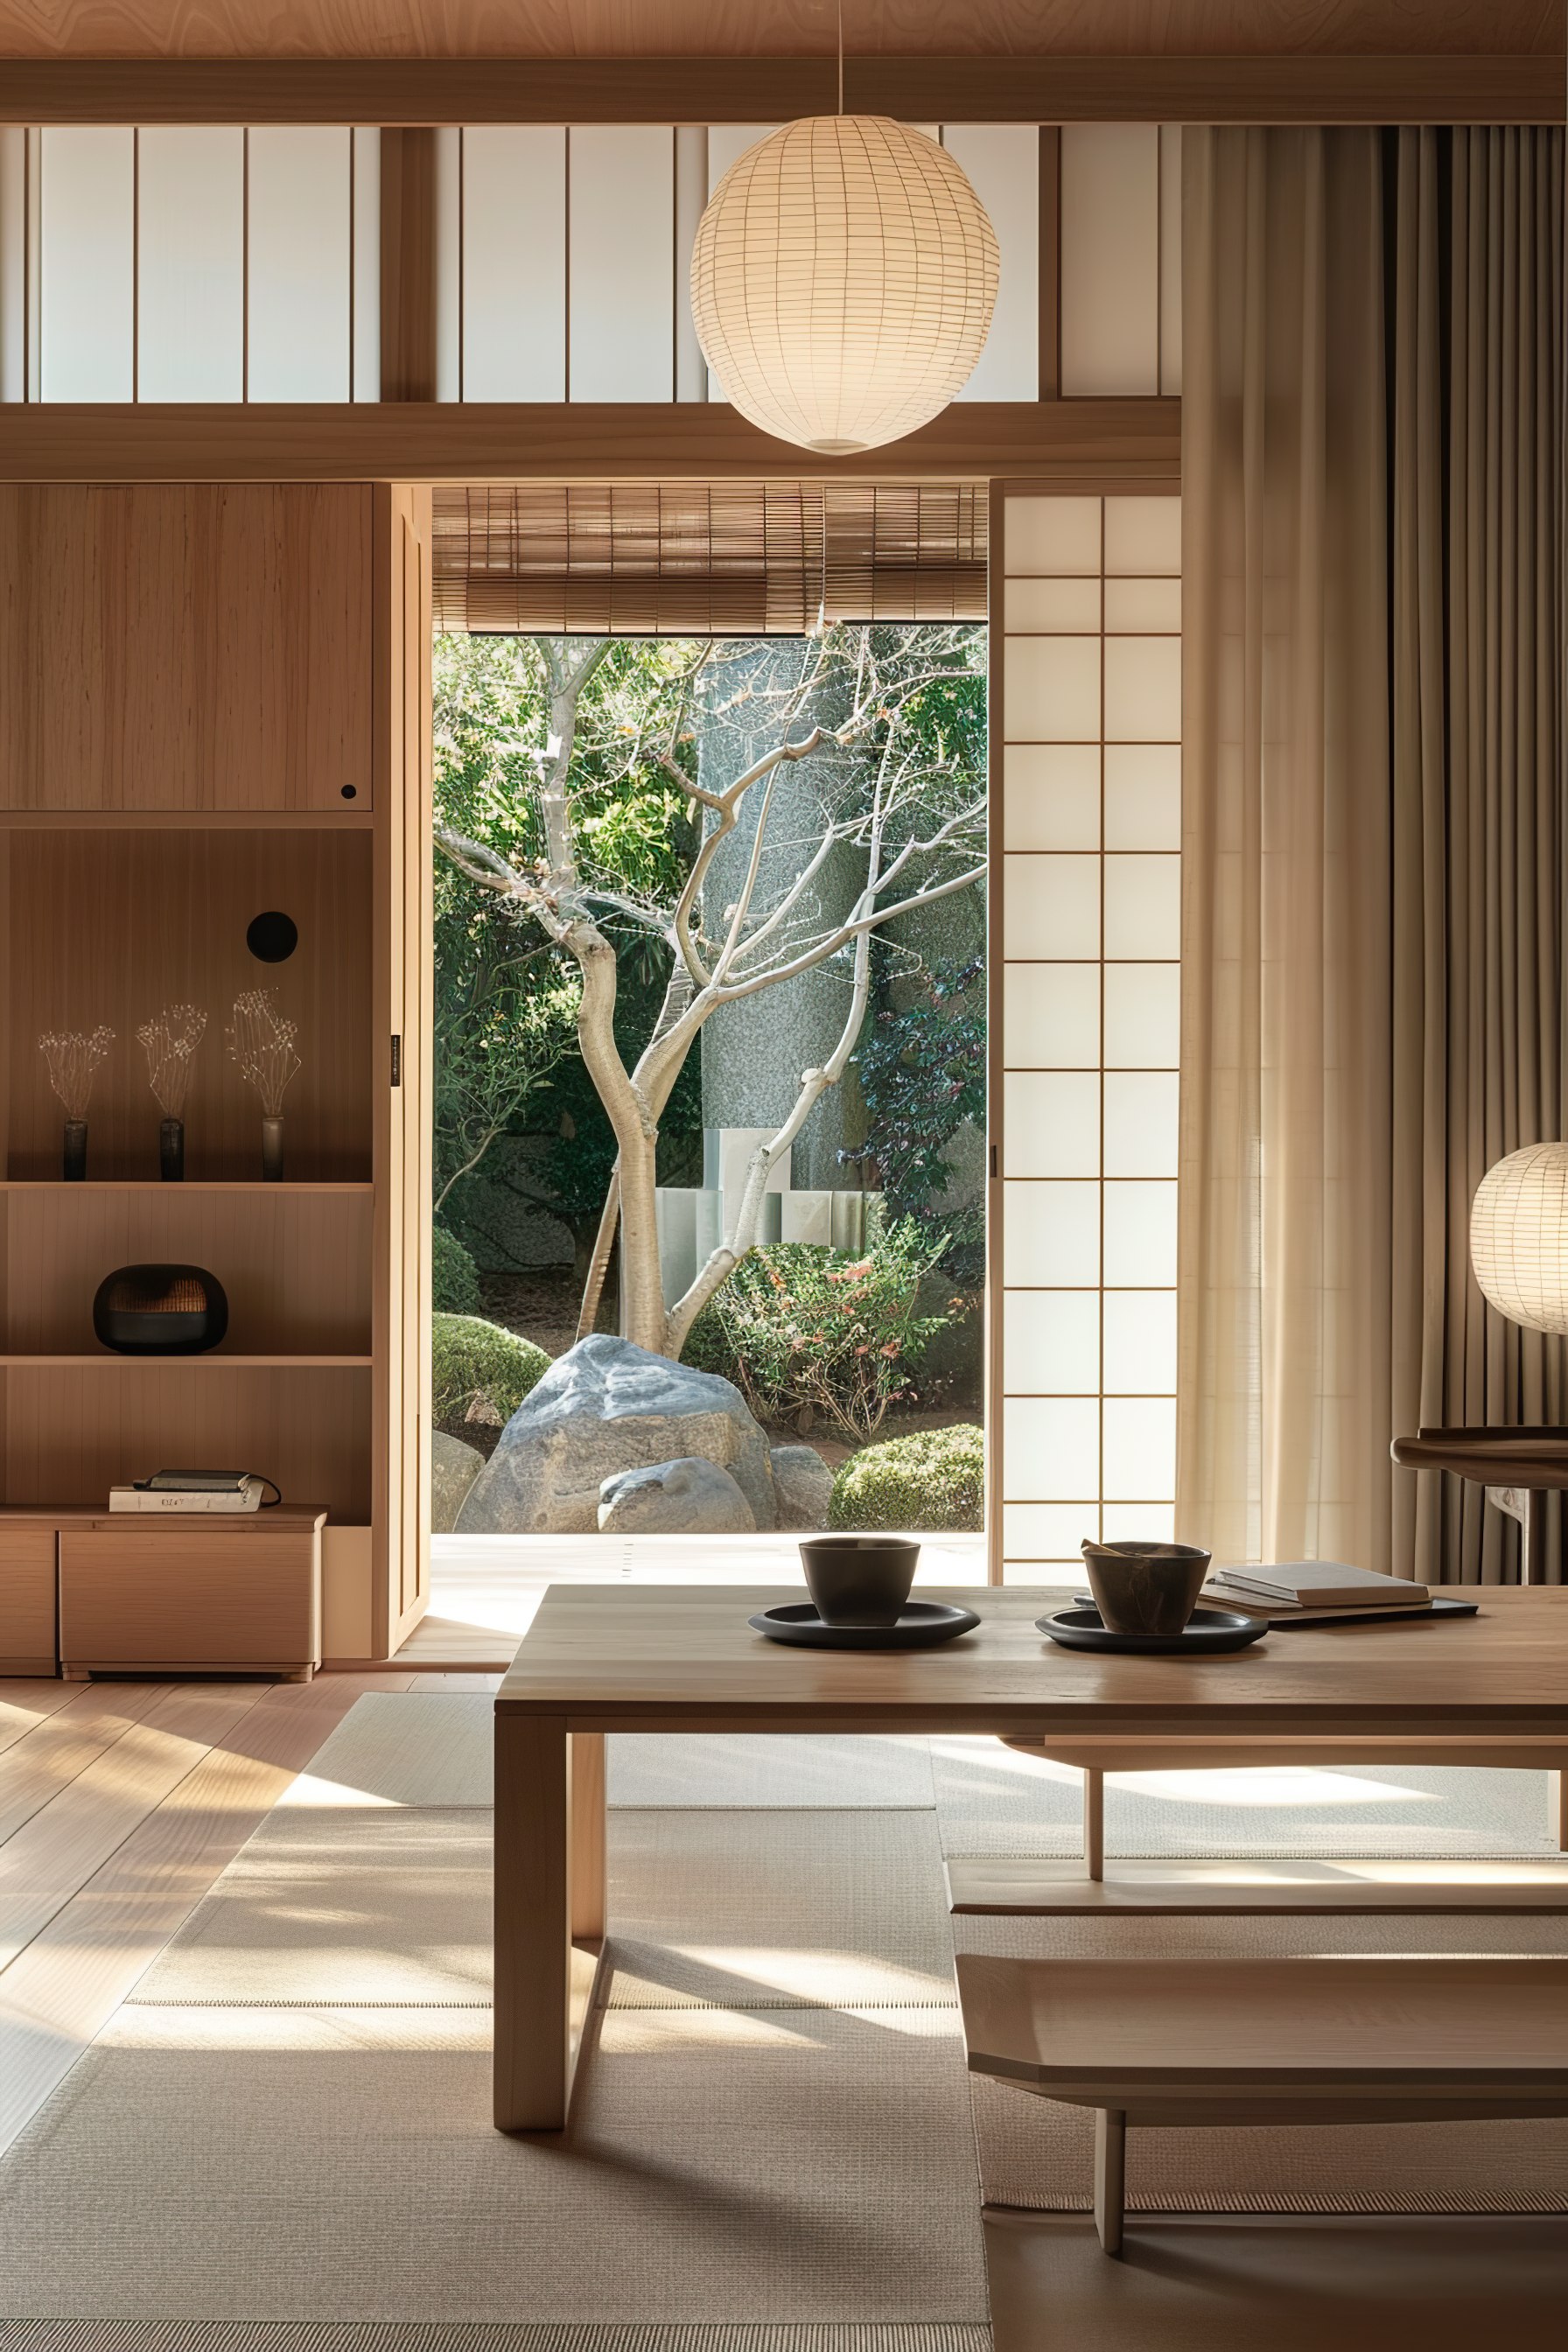 A serene Japanese-style room with tatami flooring, a wooden table set with tea, shoji doors, and a view of a Zen garden.